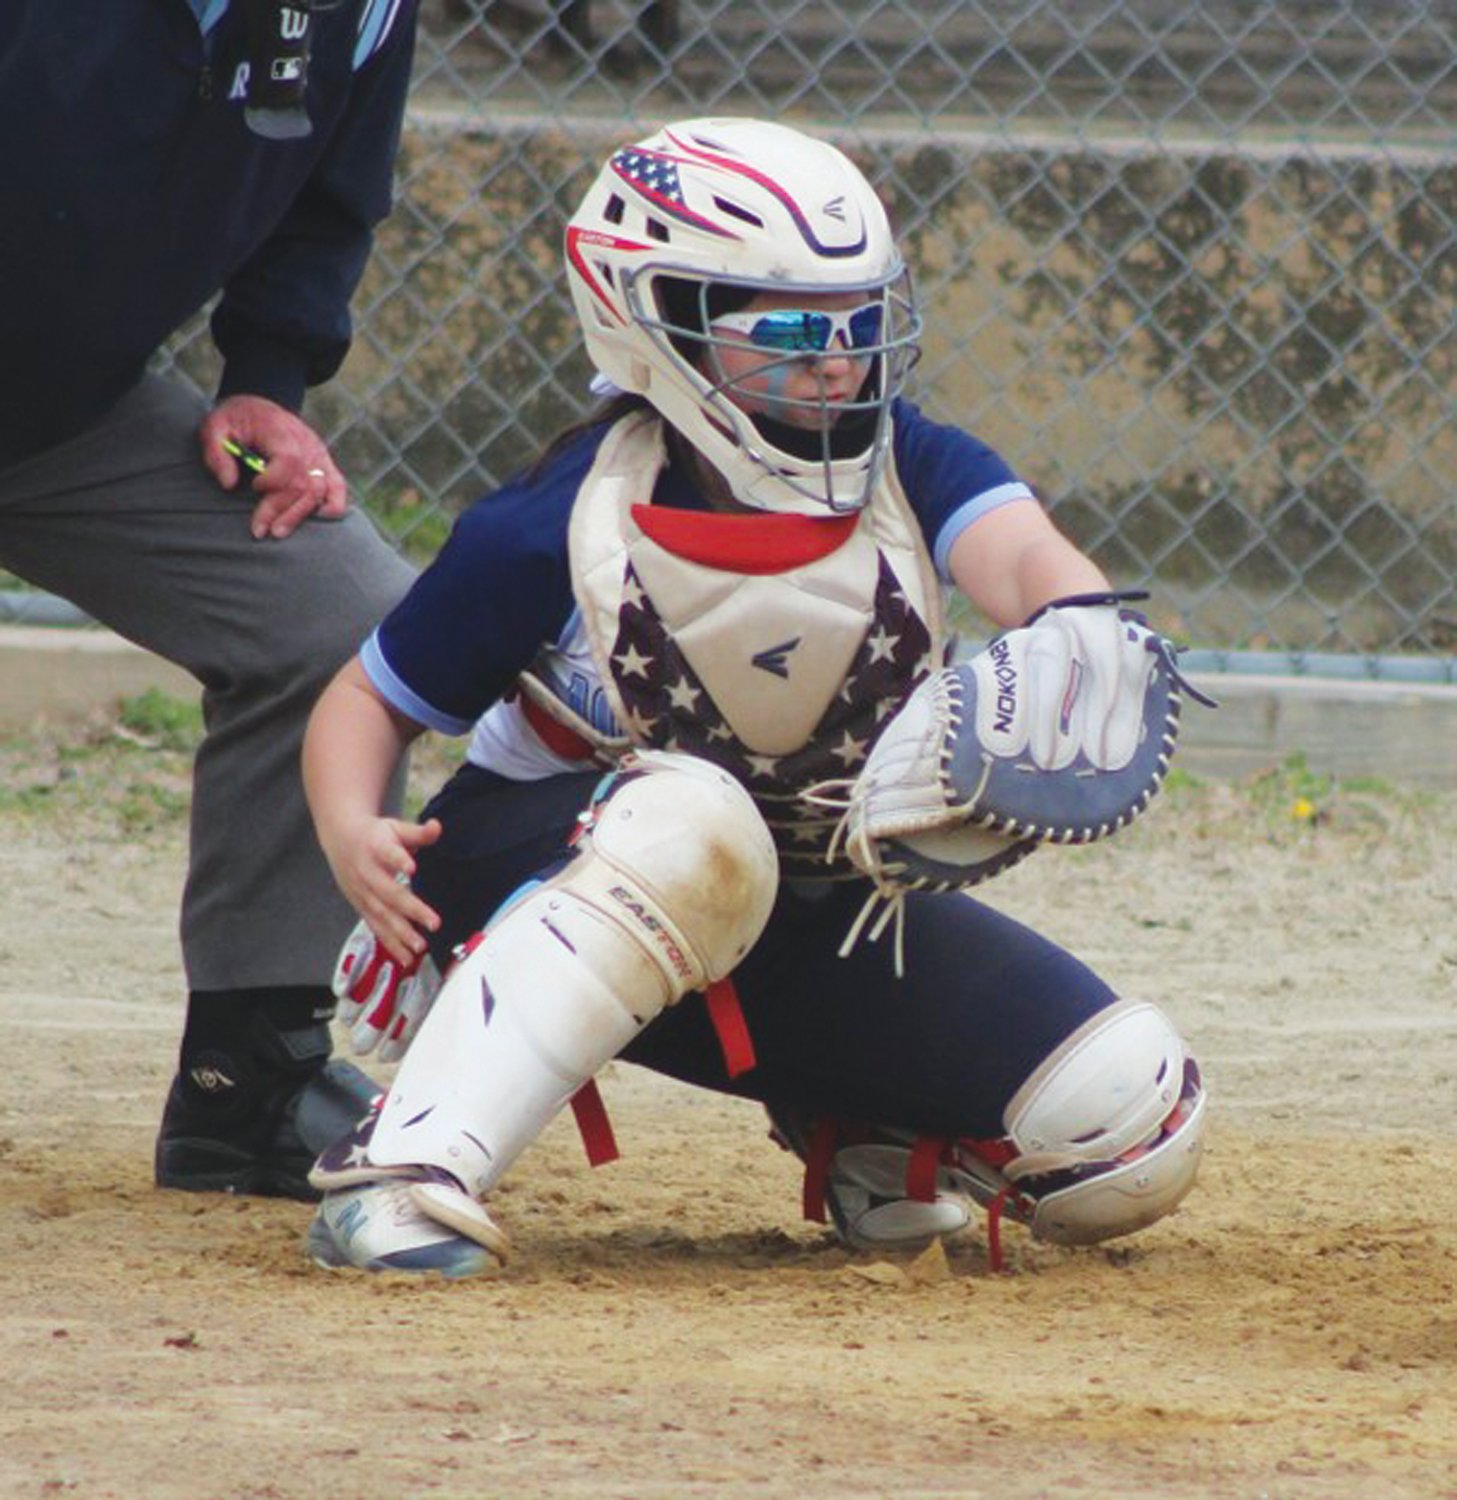 BEHIND THE PLATE: Johnston catcher Hannah Calabro.